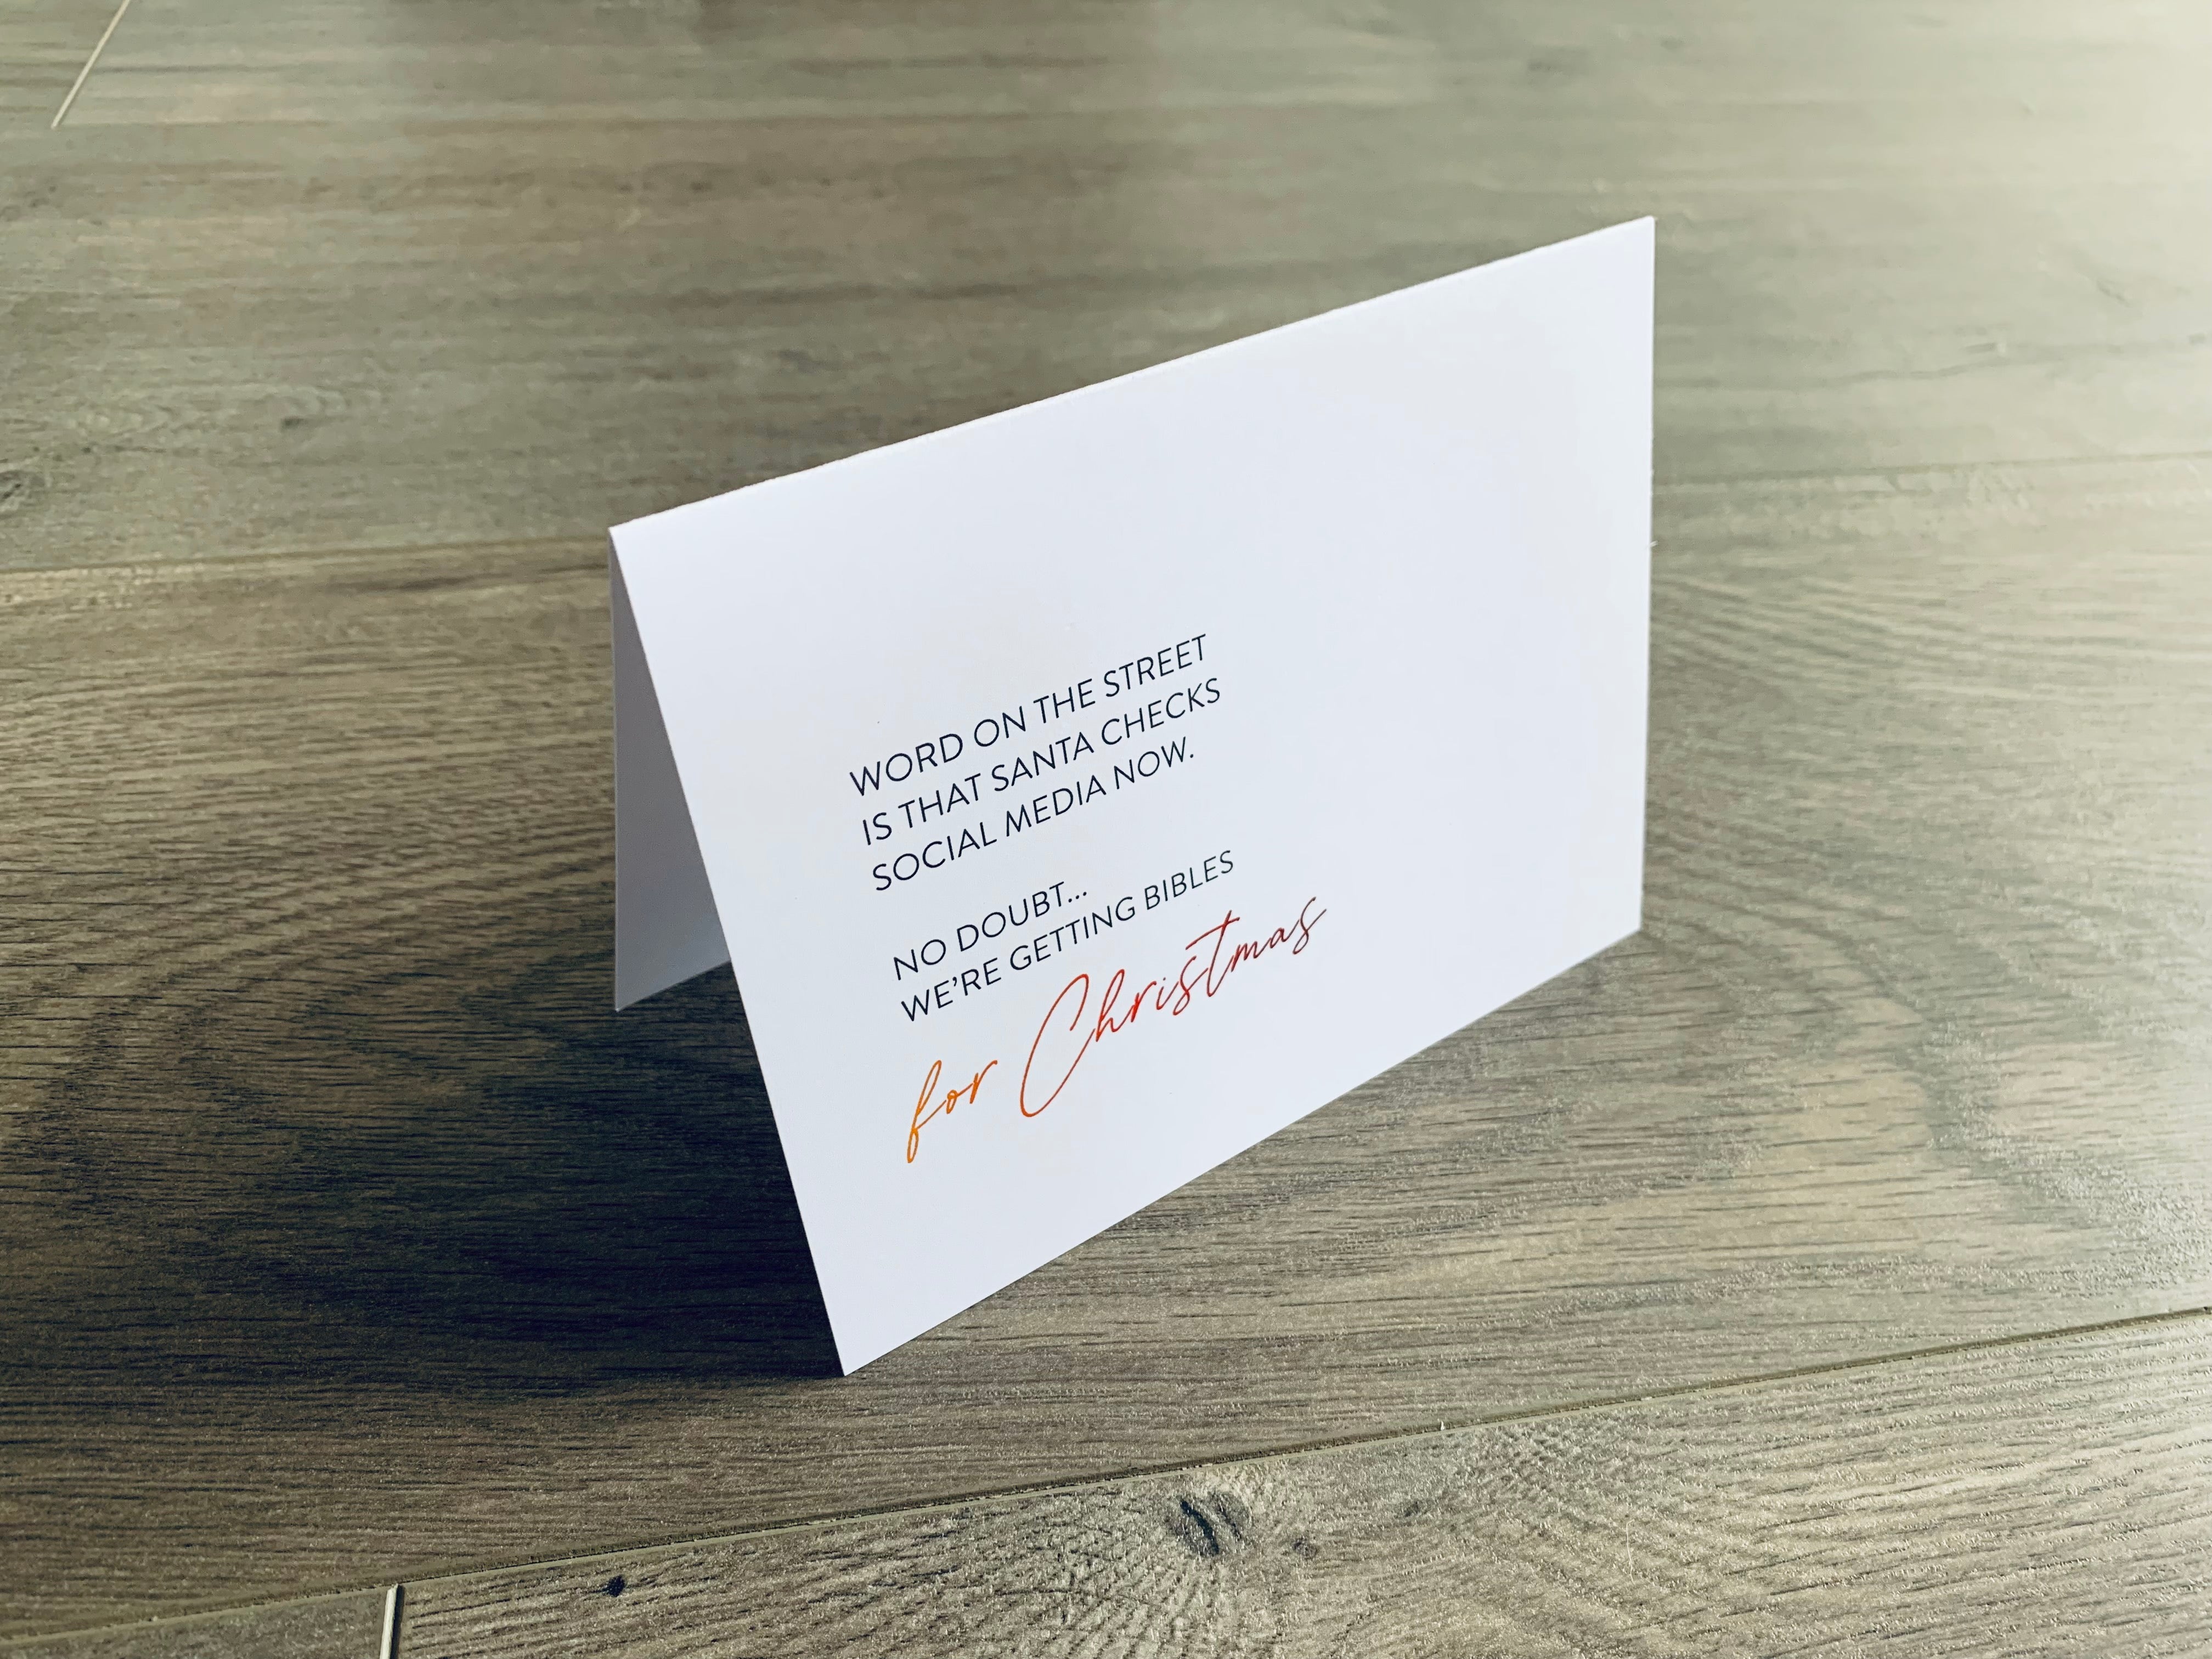 A white folded notecard is propped up on a wooden floor. On the front of the card, it says "Word on the street is that Santa checks social media now. No doubt... we're getting bibles for Christmas." Christmas Chuckles collection by Stationare.